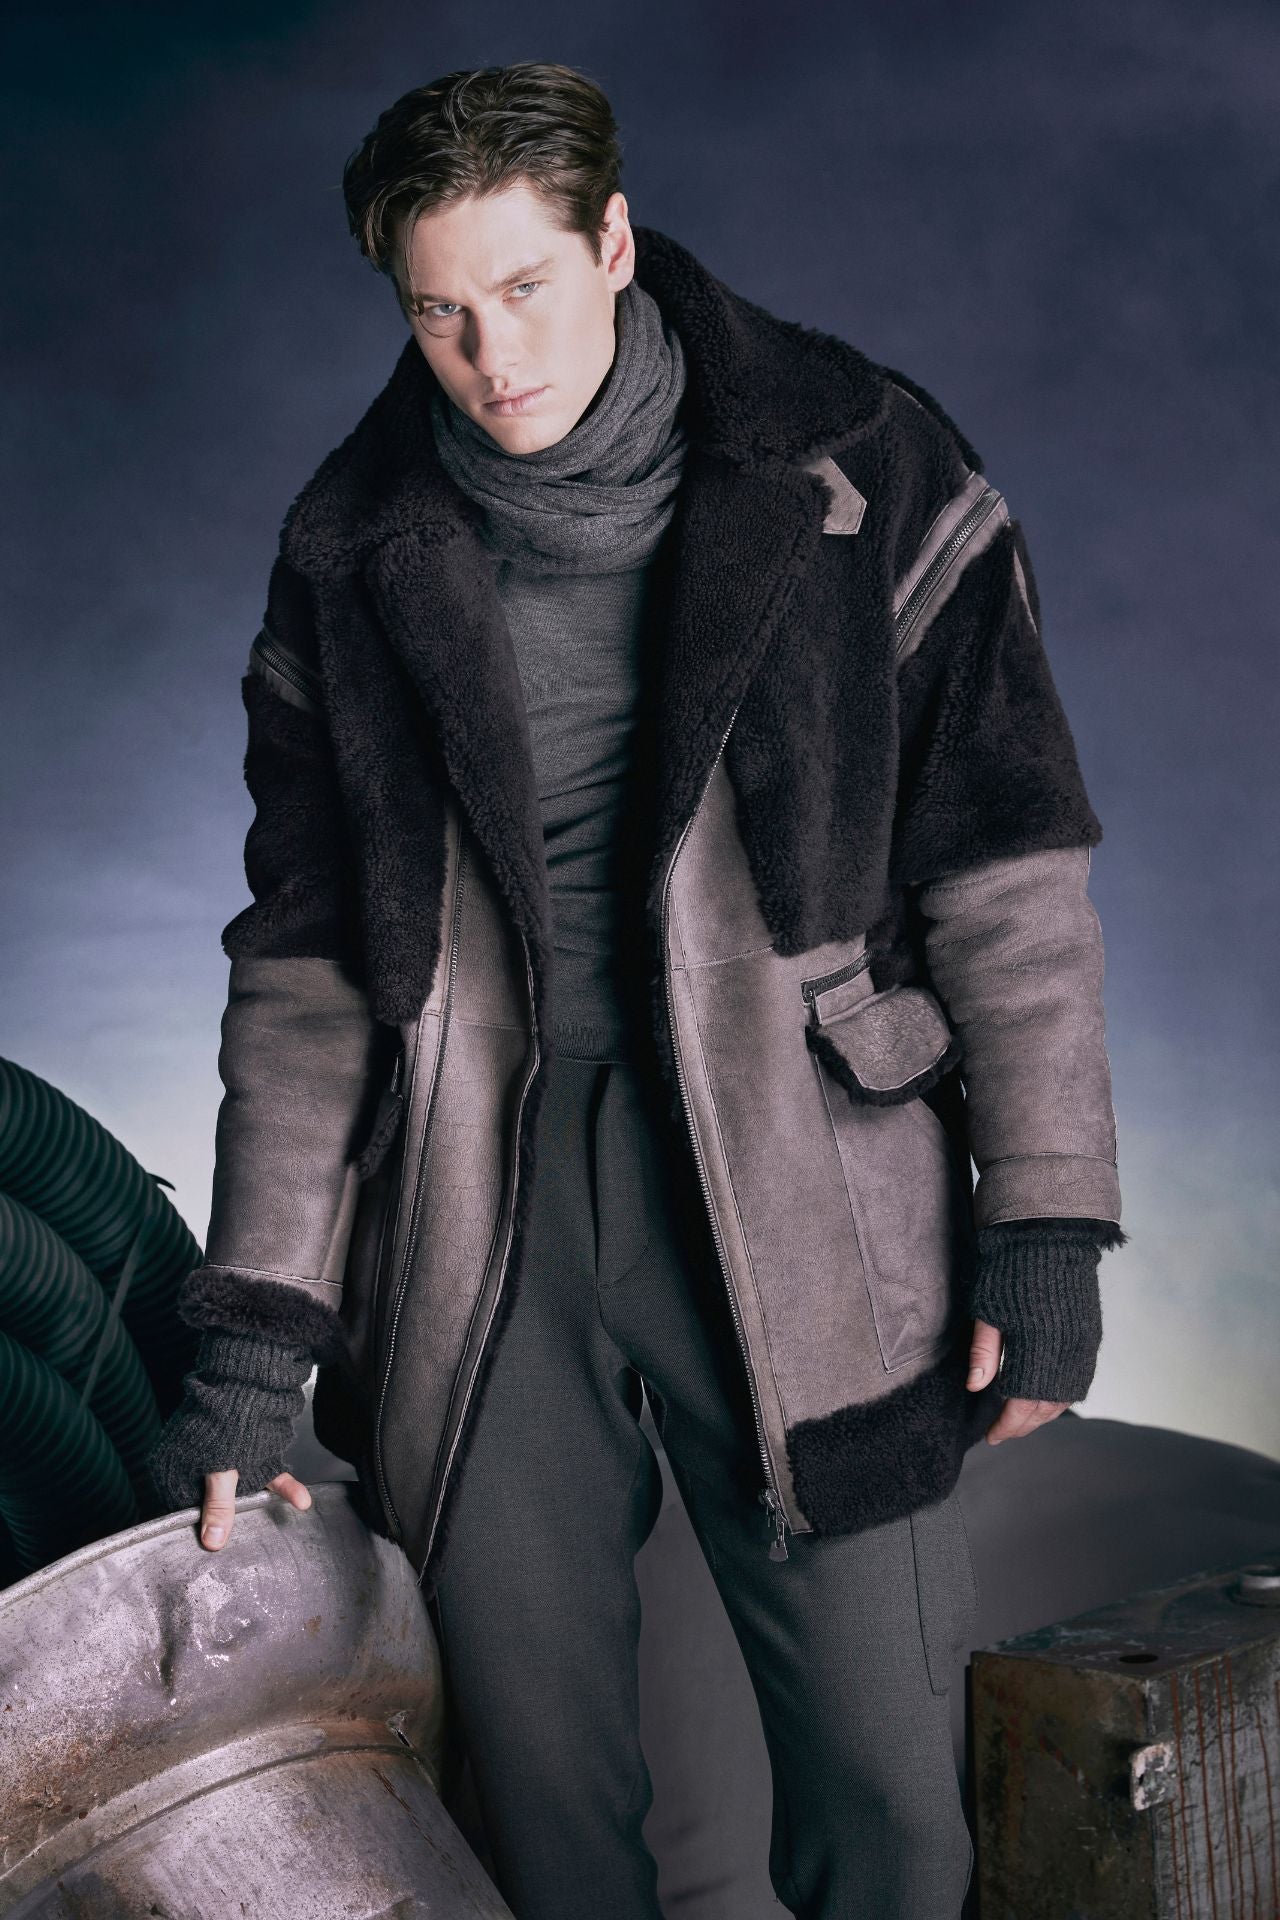 Discover Guardian, our designer mens shearling. A 34" wool jacket featuring wool panels. Convertible to a vest with zip-off sleeves, it offers versatility. This zip-front black Spanish sheepskin coat provides optimal winter defense with an oversized notched collar, collar tabs with belt-loop closure, two-way zipper, and interior zipper pocket, blending fashion with functionality.